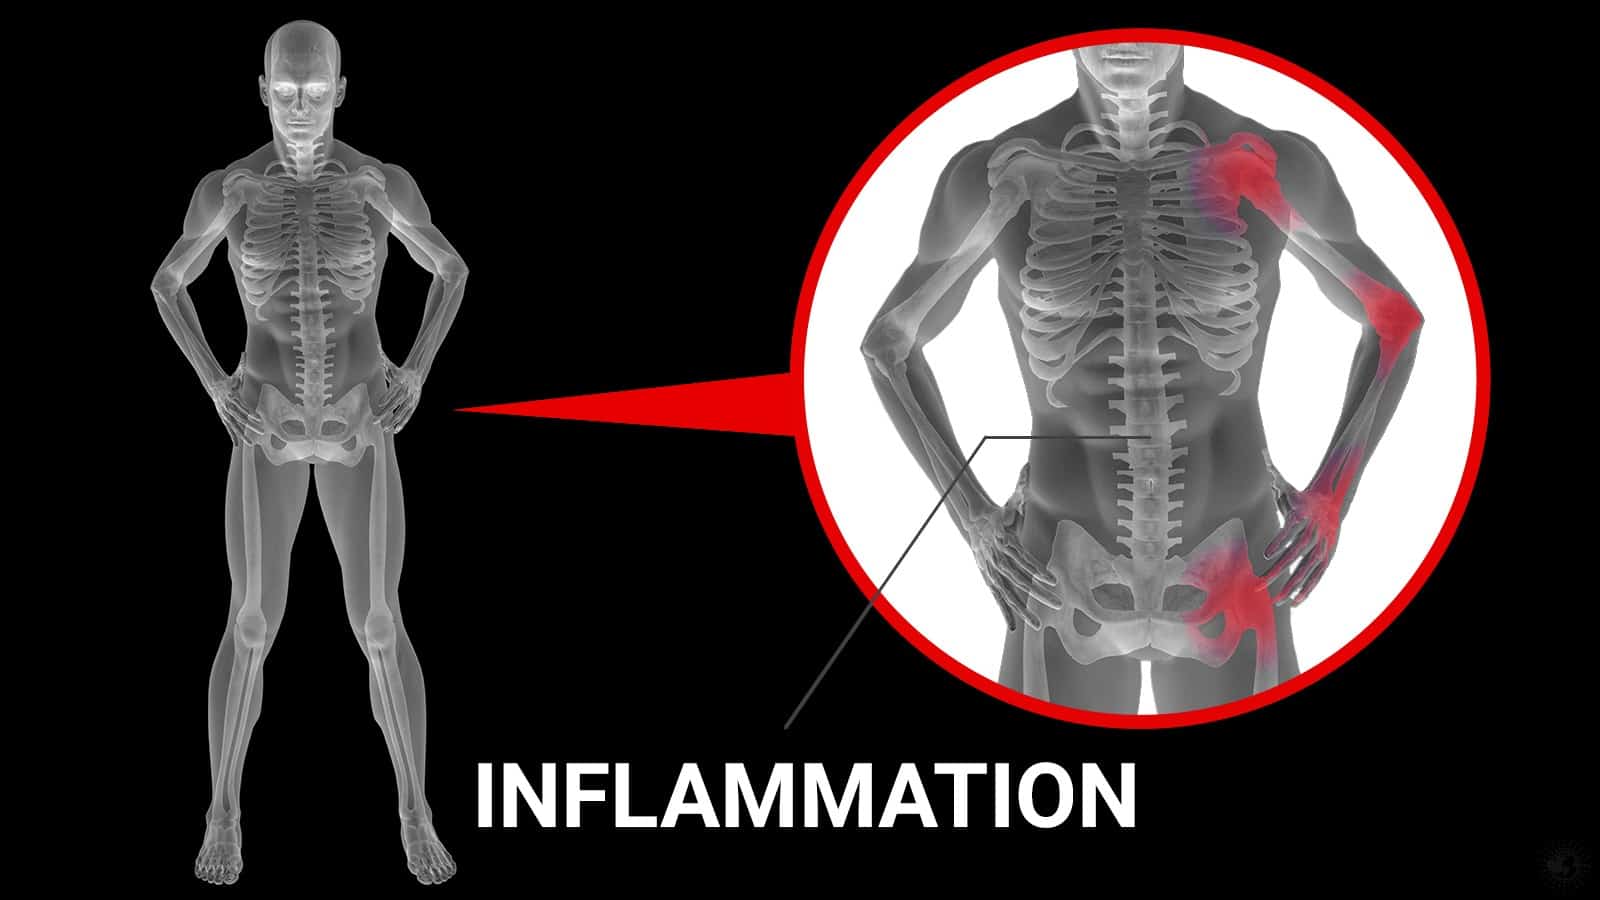 Experts Reveal 10 Foods That Fight Inflammation